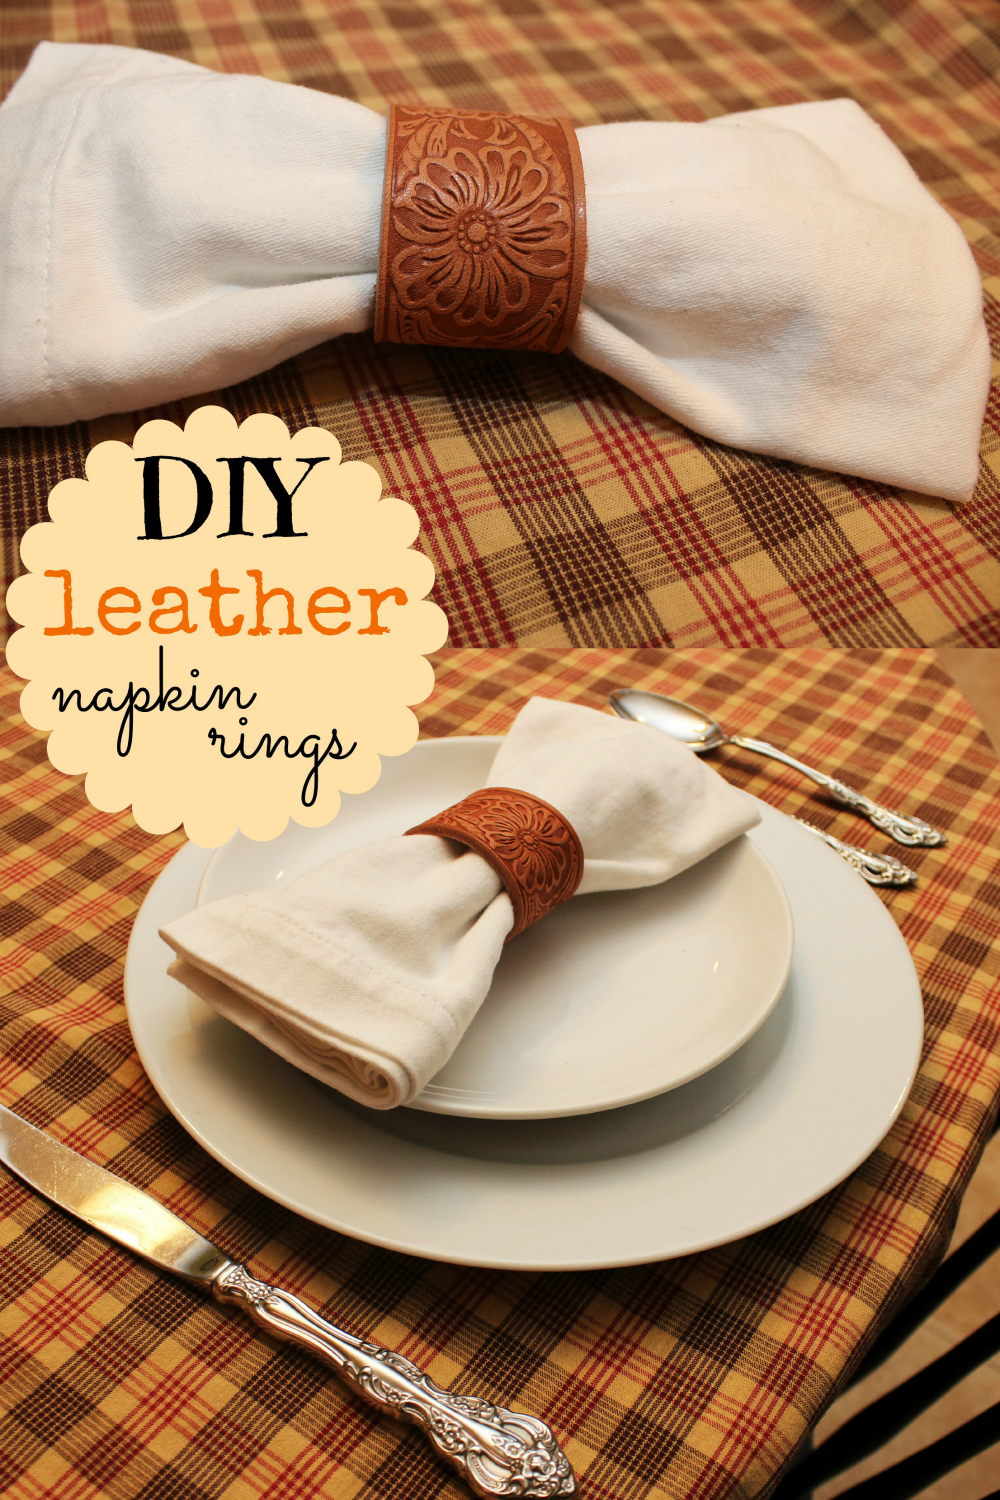 Add an unexpected touch to your table with these DIY leather napkin rings. They look fabulous and fancy, but are super easy to make.